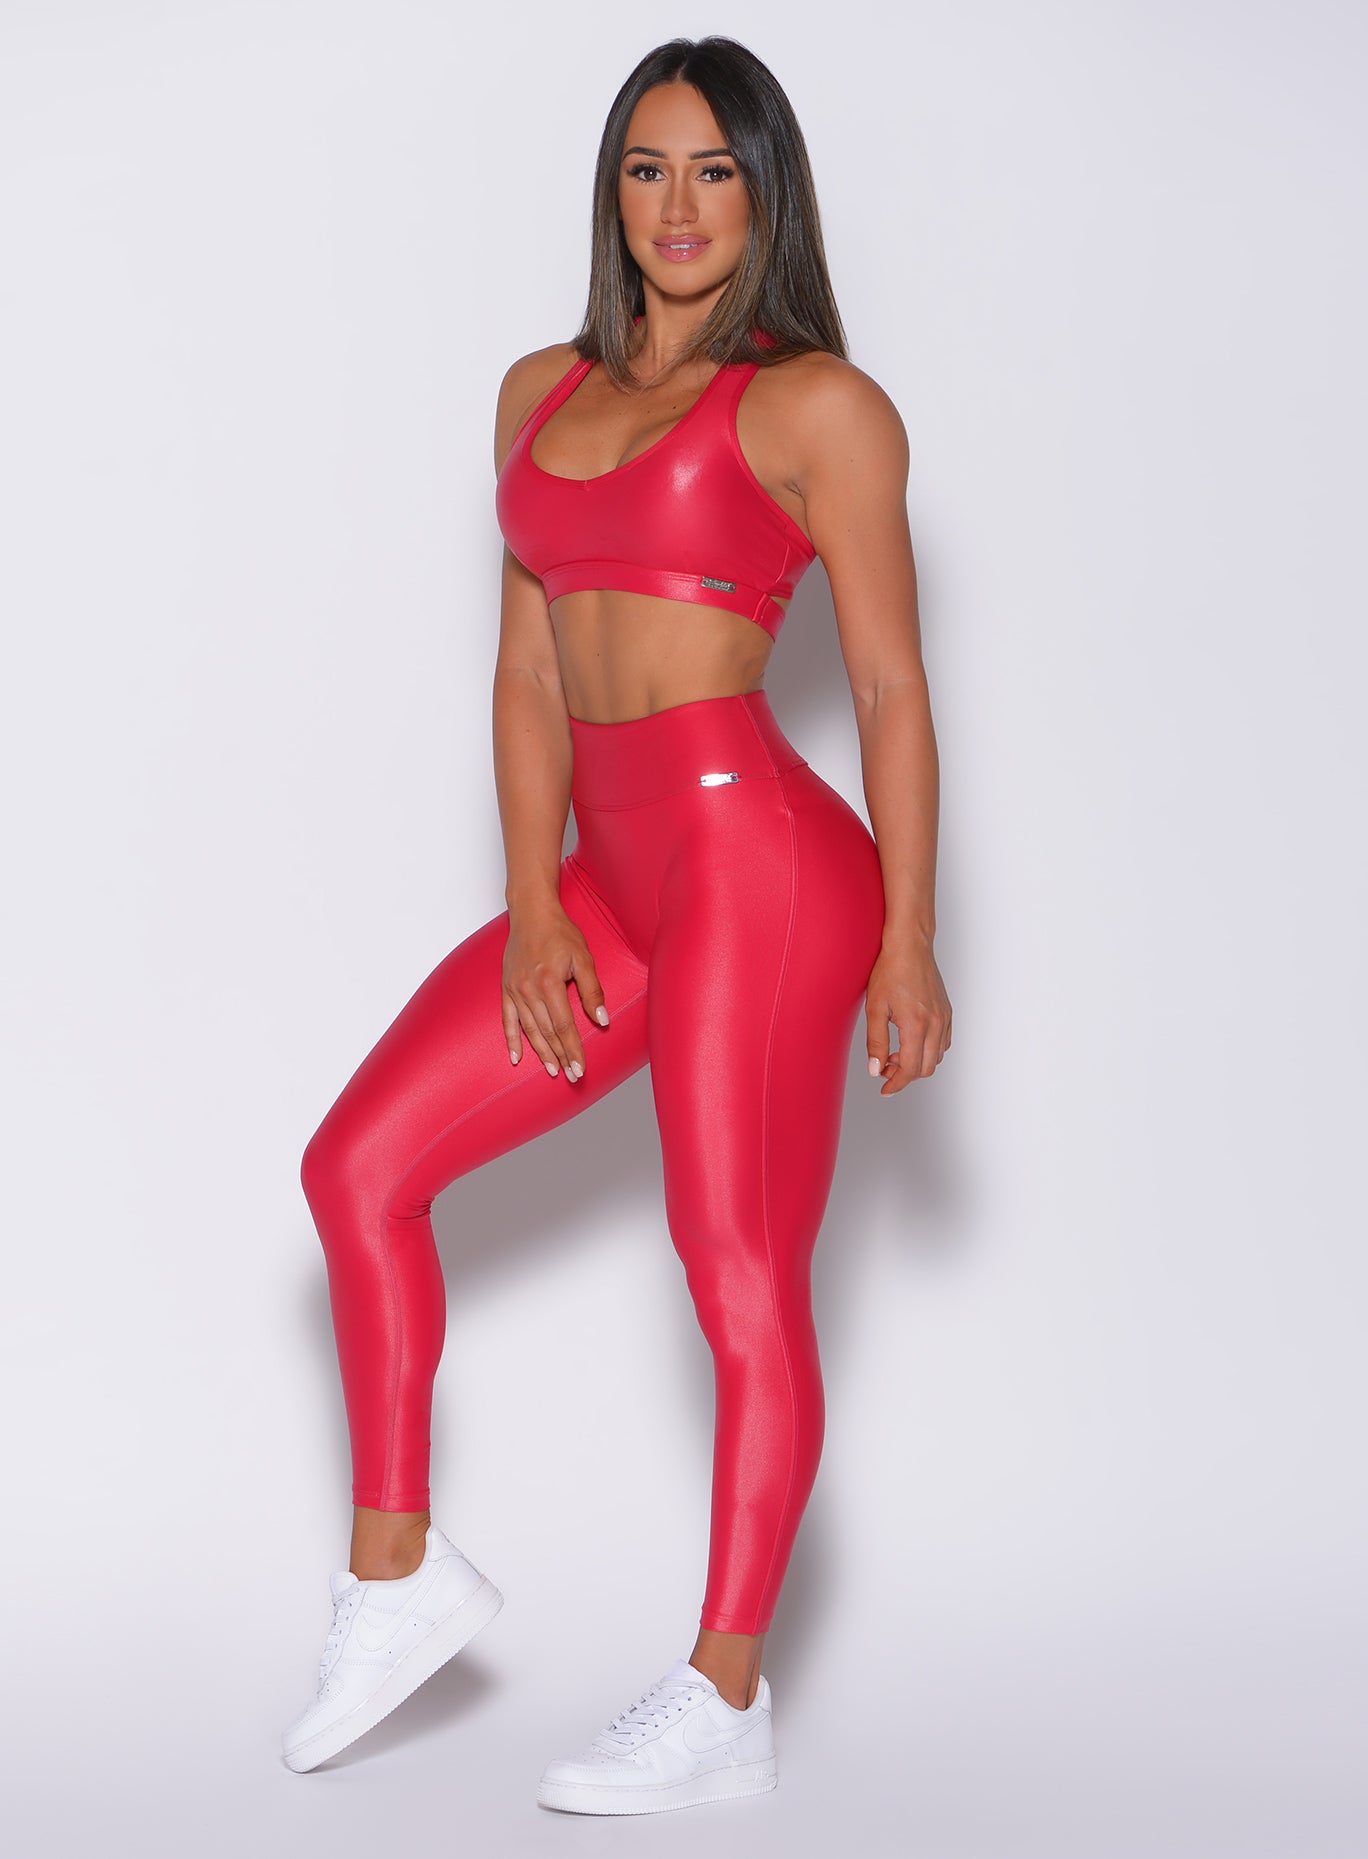 left side profile view of a model angled left wearing our red gloss leggings and a matching bra